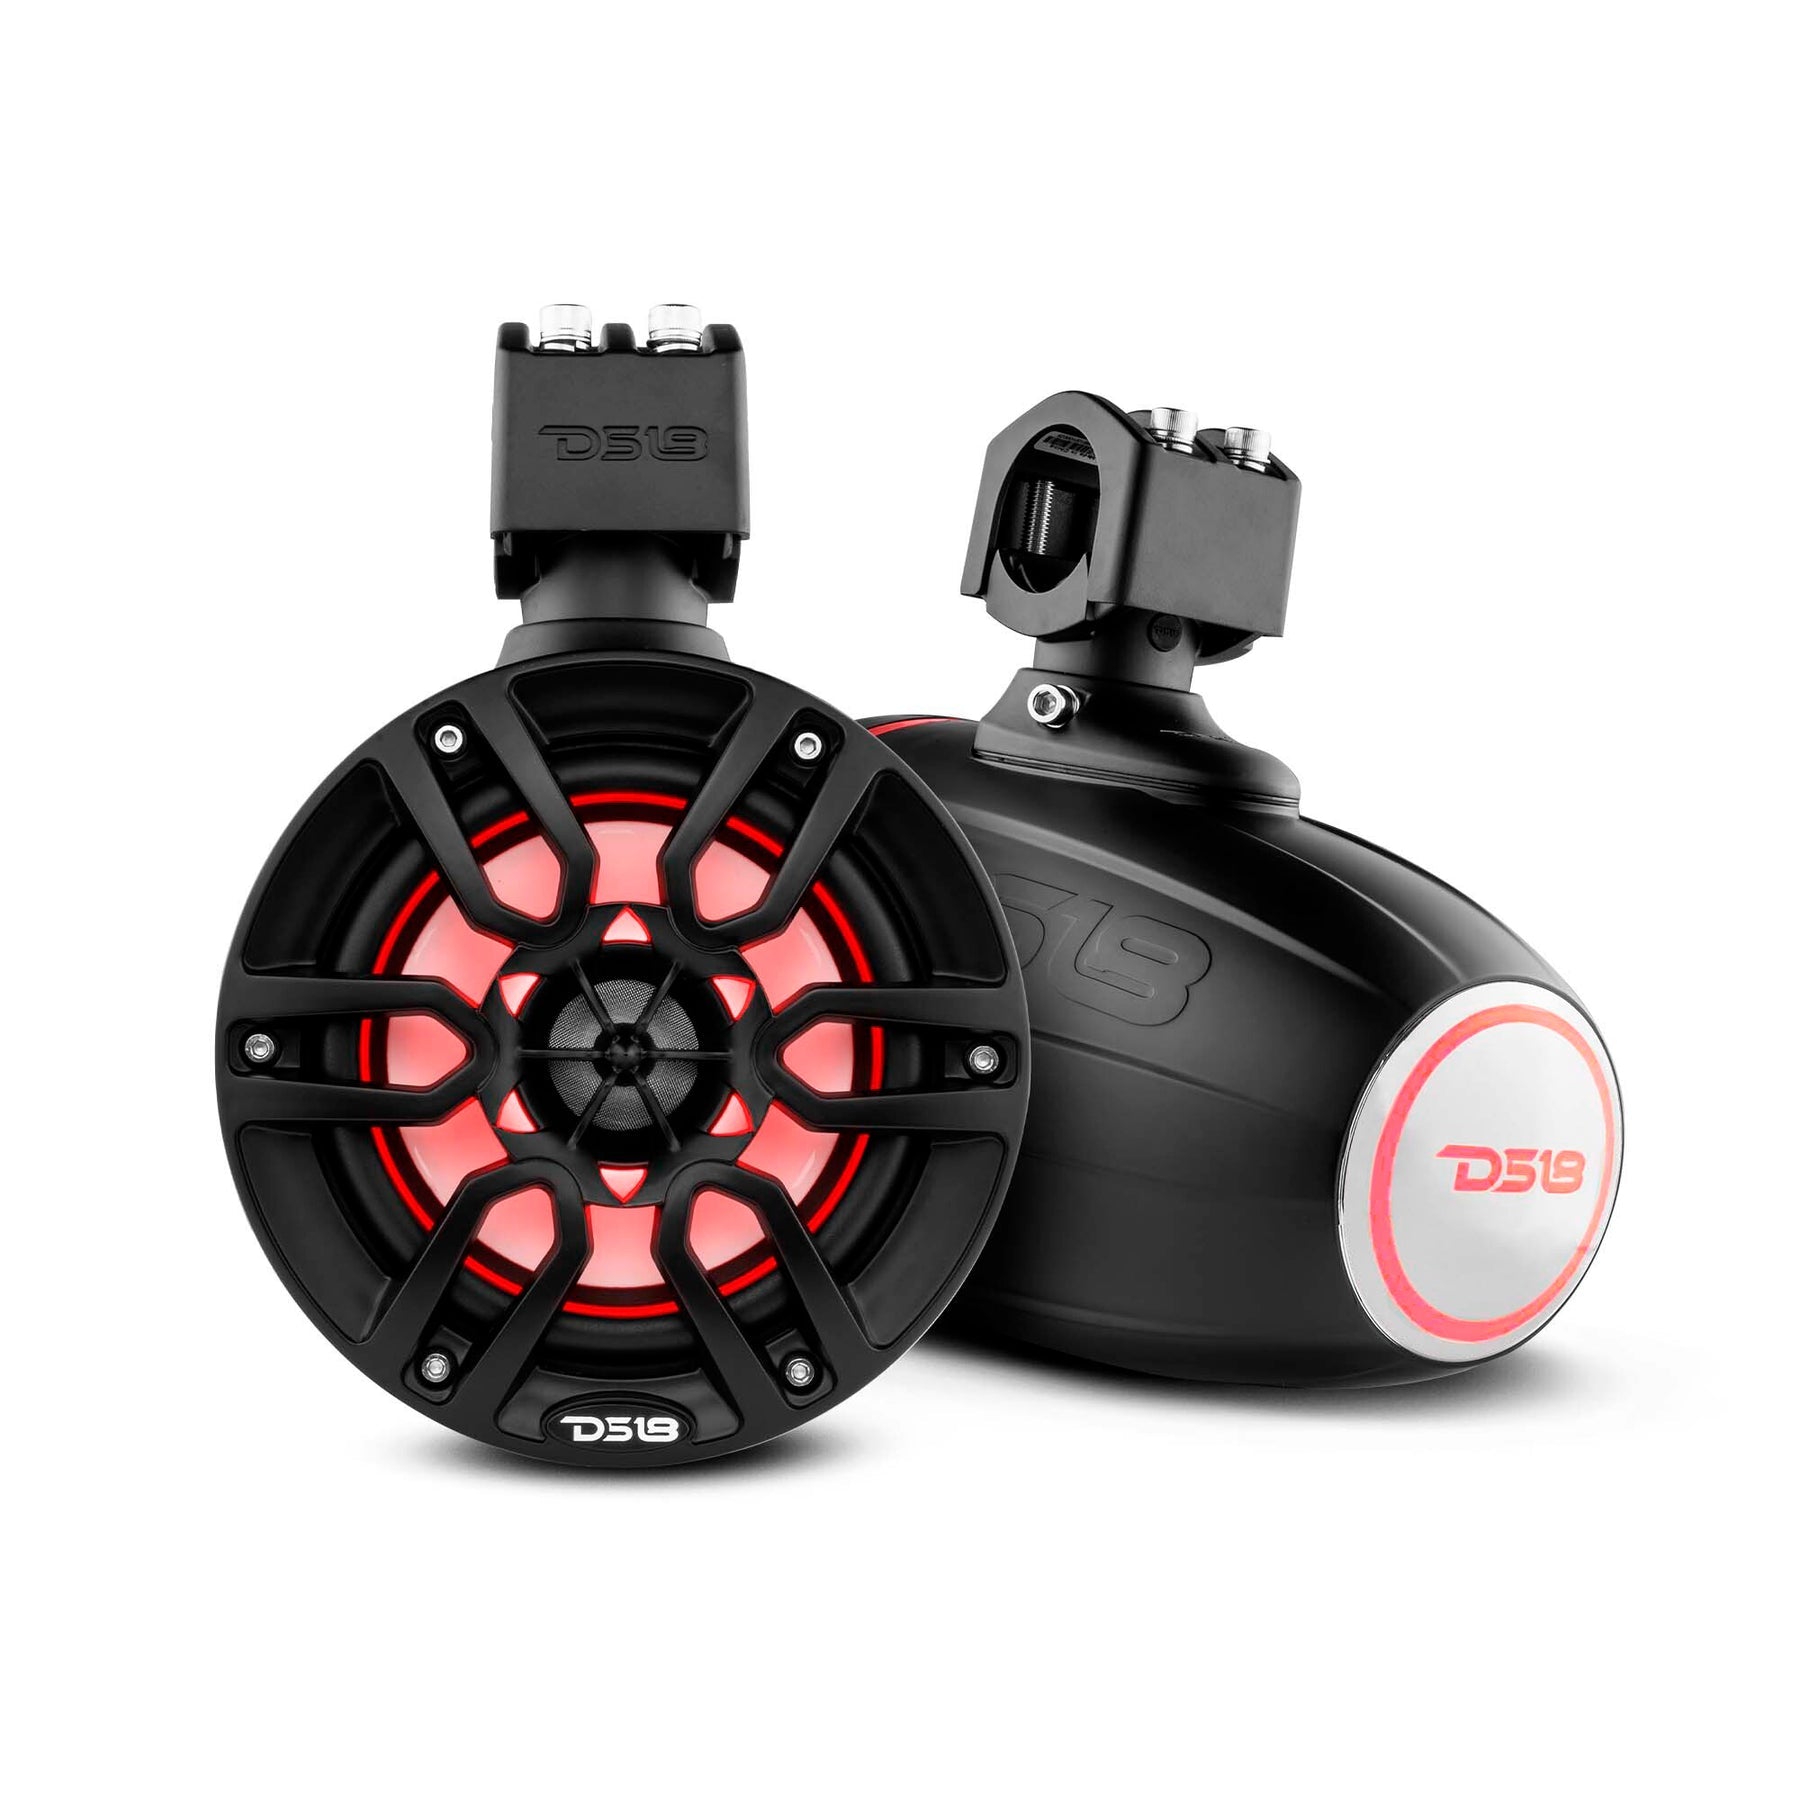 DS18 HYDRO NXL-X6TP 6.5" Marine Water Resistant Wakeboard Tower Speakers with Integrated RGB LED Lights 300 Watts